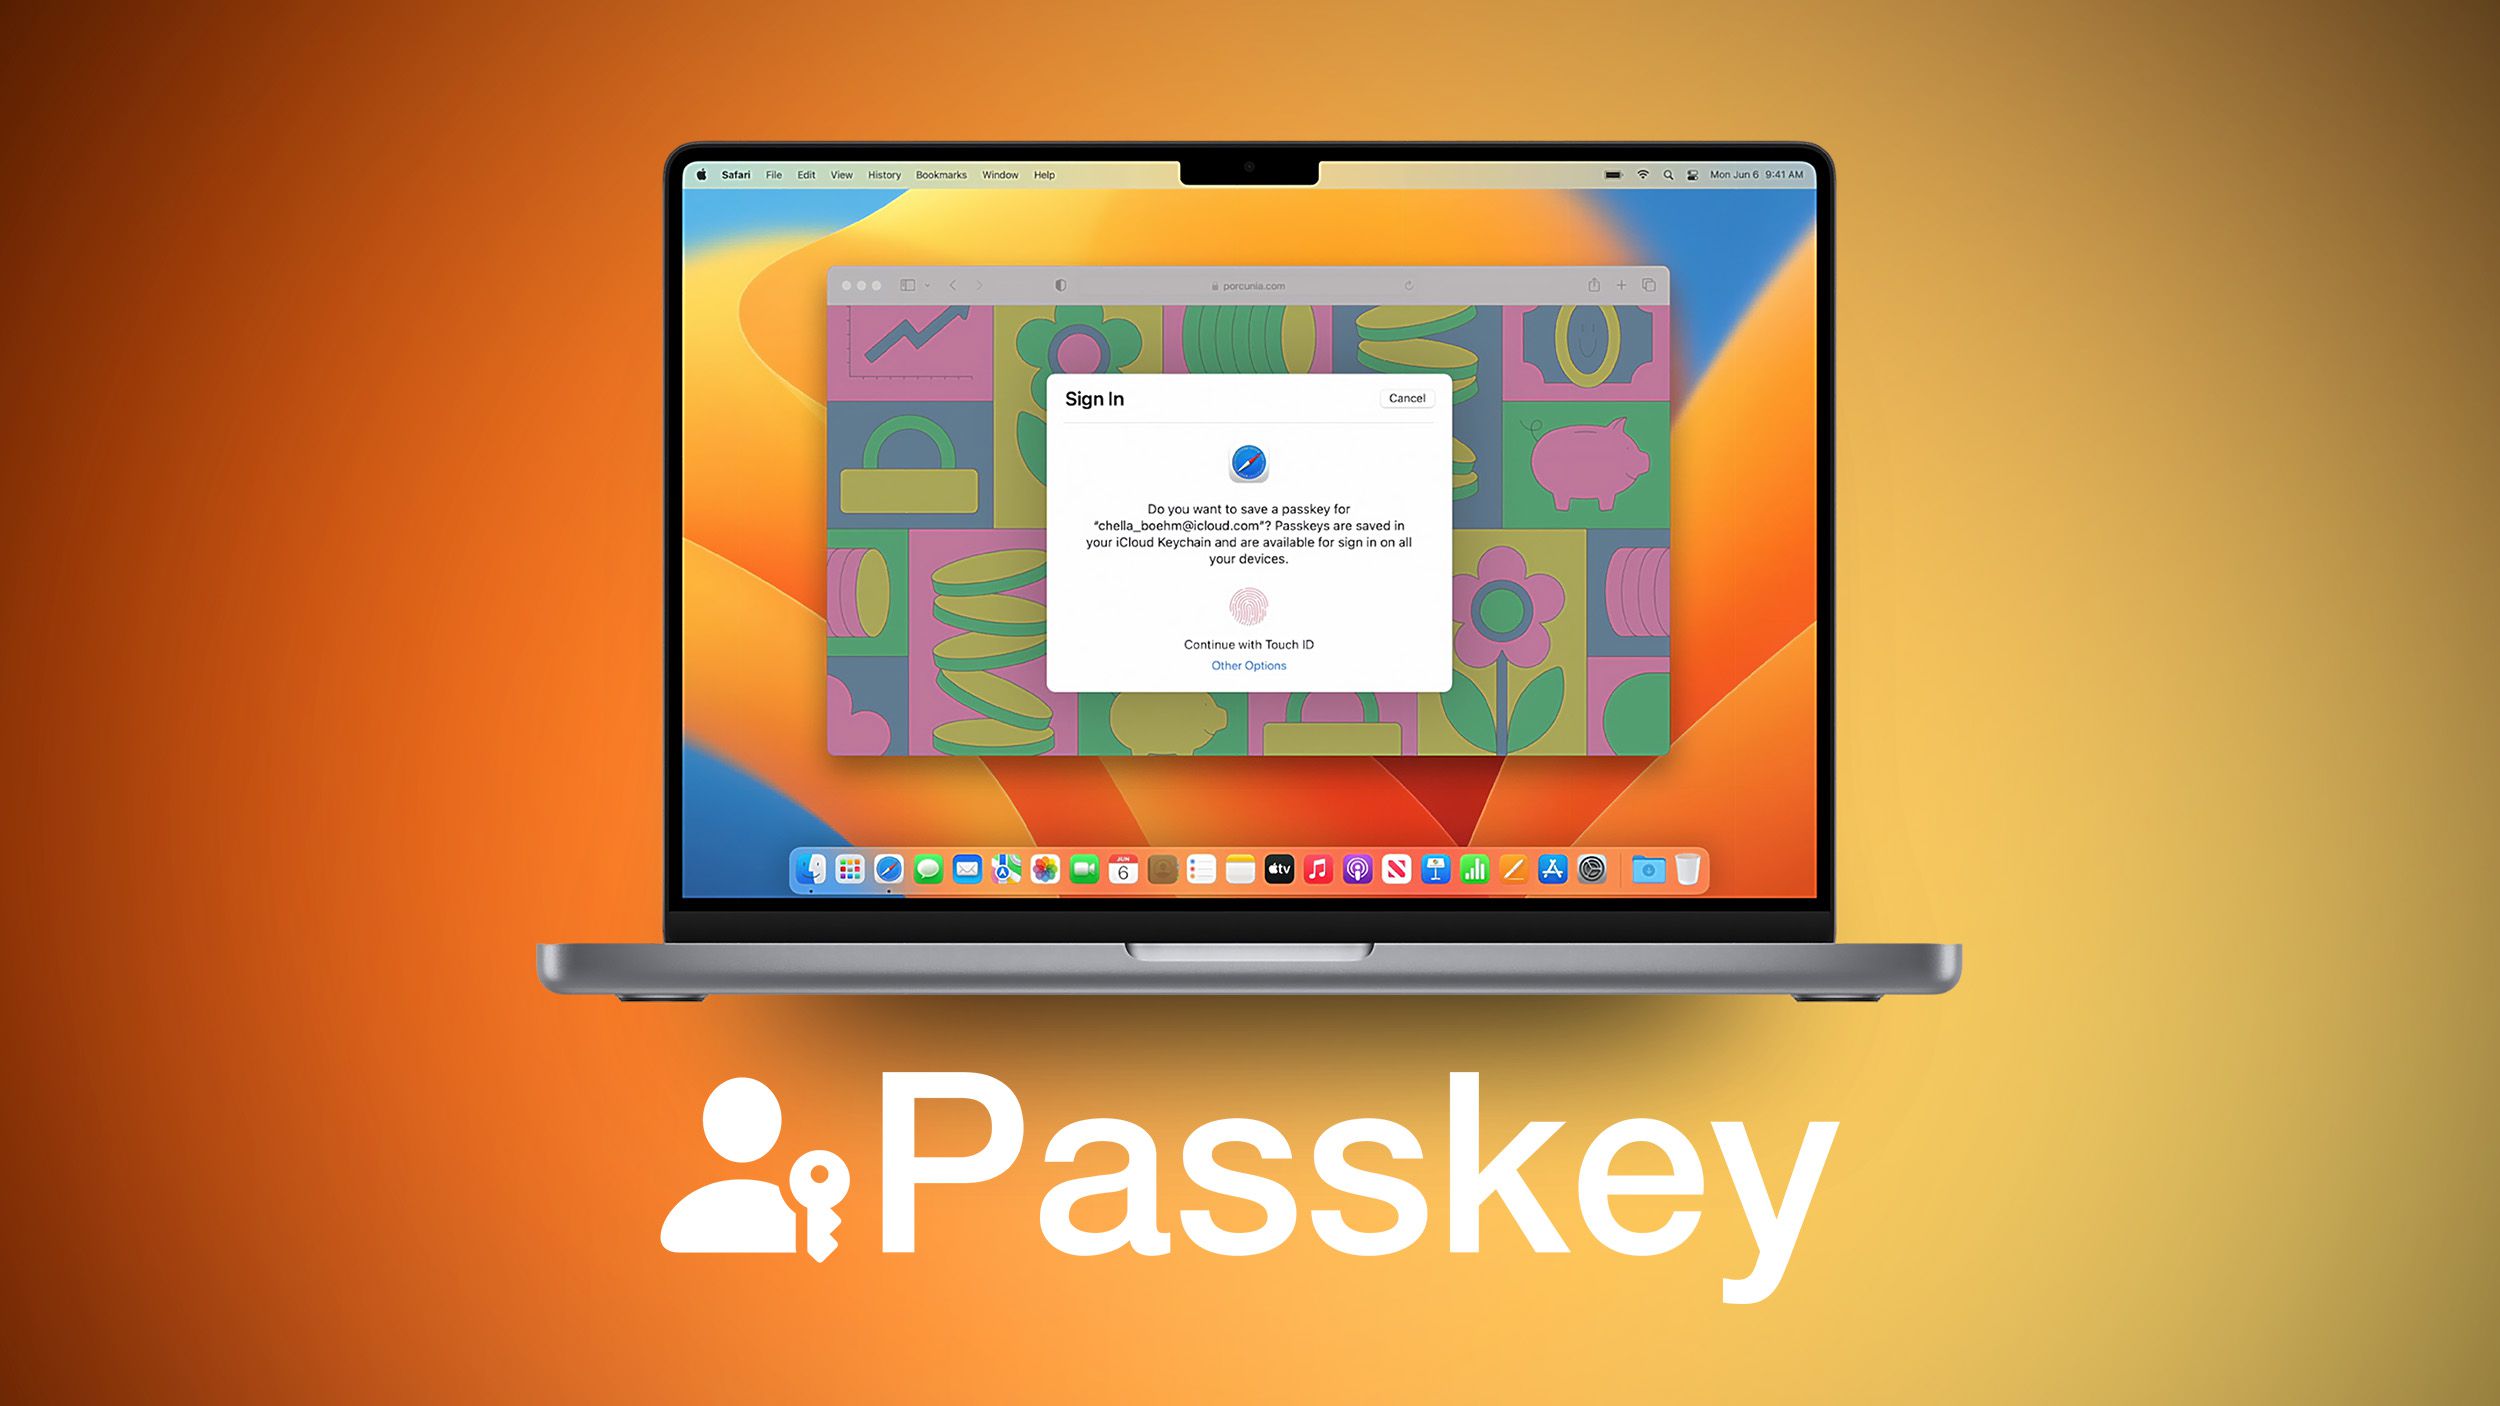 Apple Aiming to Replace Passwords With New Passkey Feature - macrumors.com